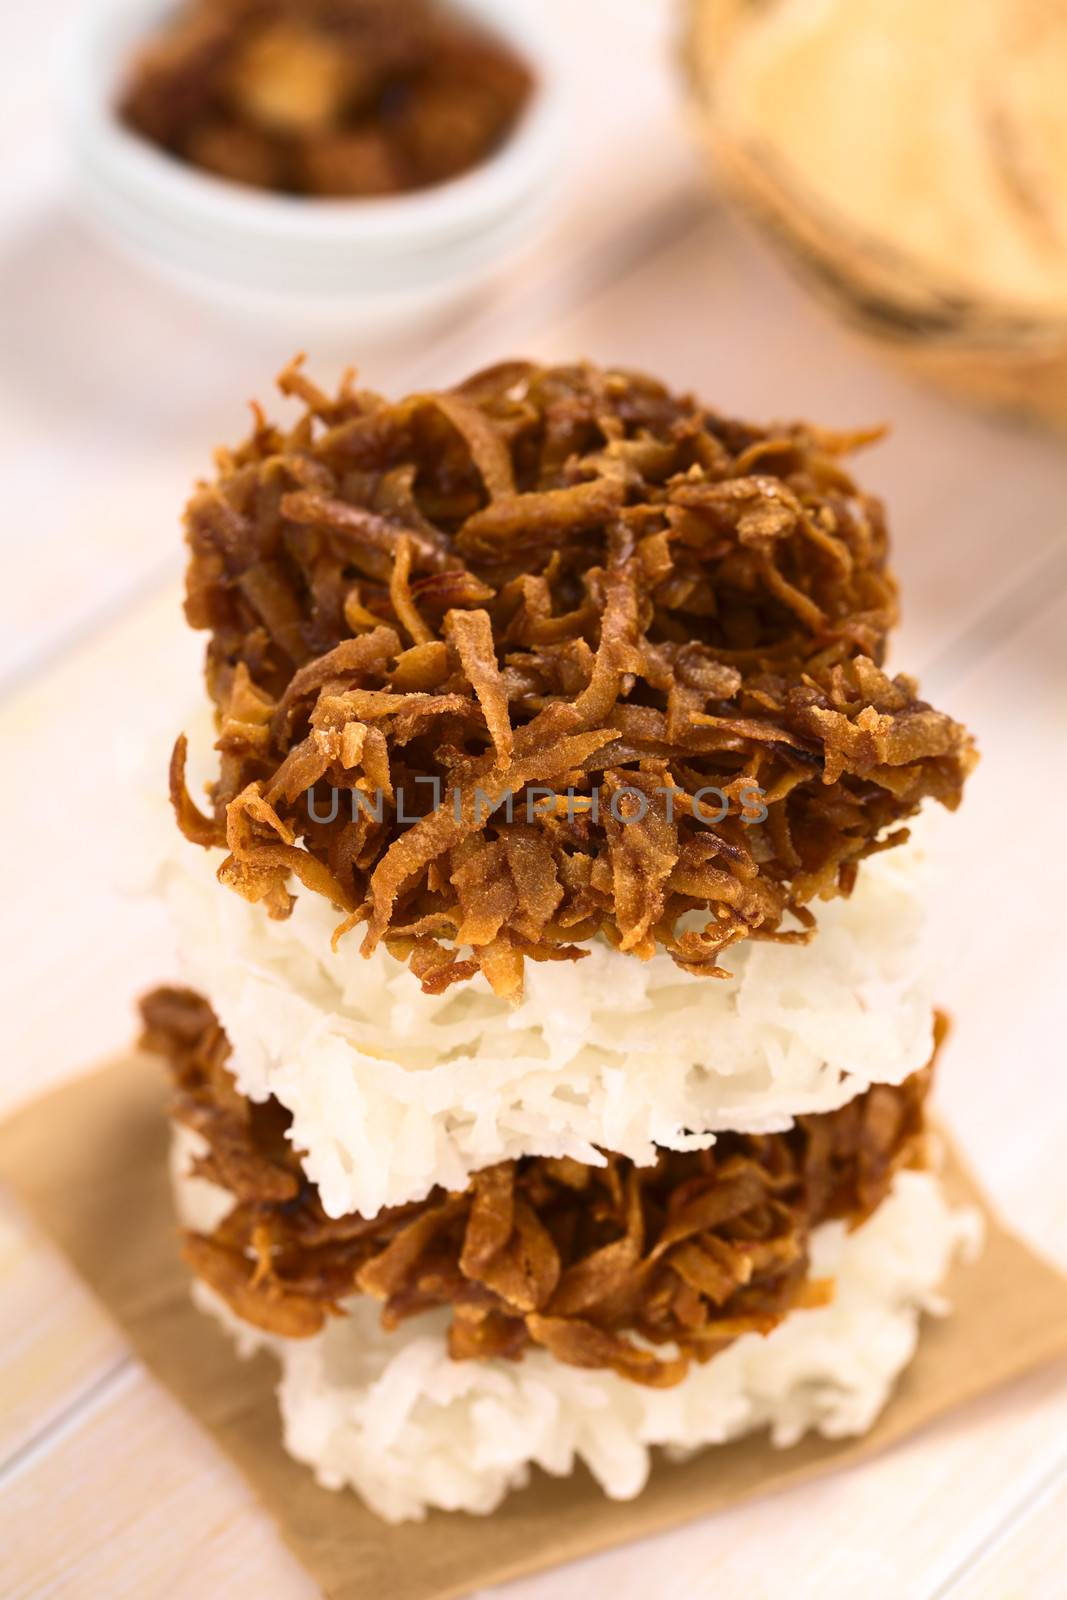 Peruvian cocadas, a traditional coconut dessert sold usually on the streets, made of grated coconut and white or brown sugar, which gives the different coloring of the sweet (Selective Focus, Focus on the front of the upper cocada)